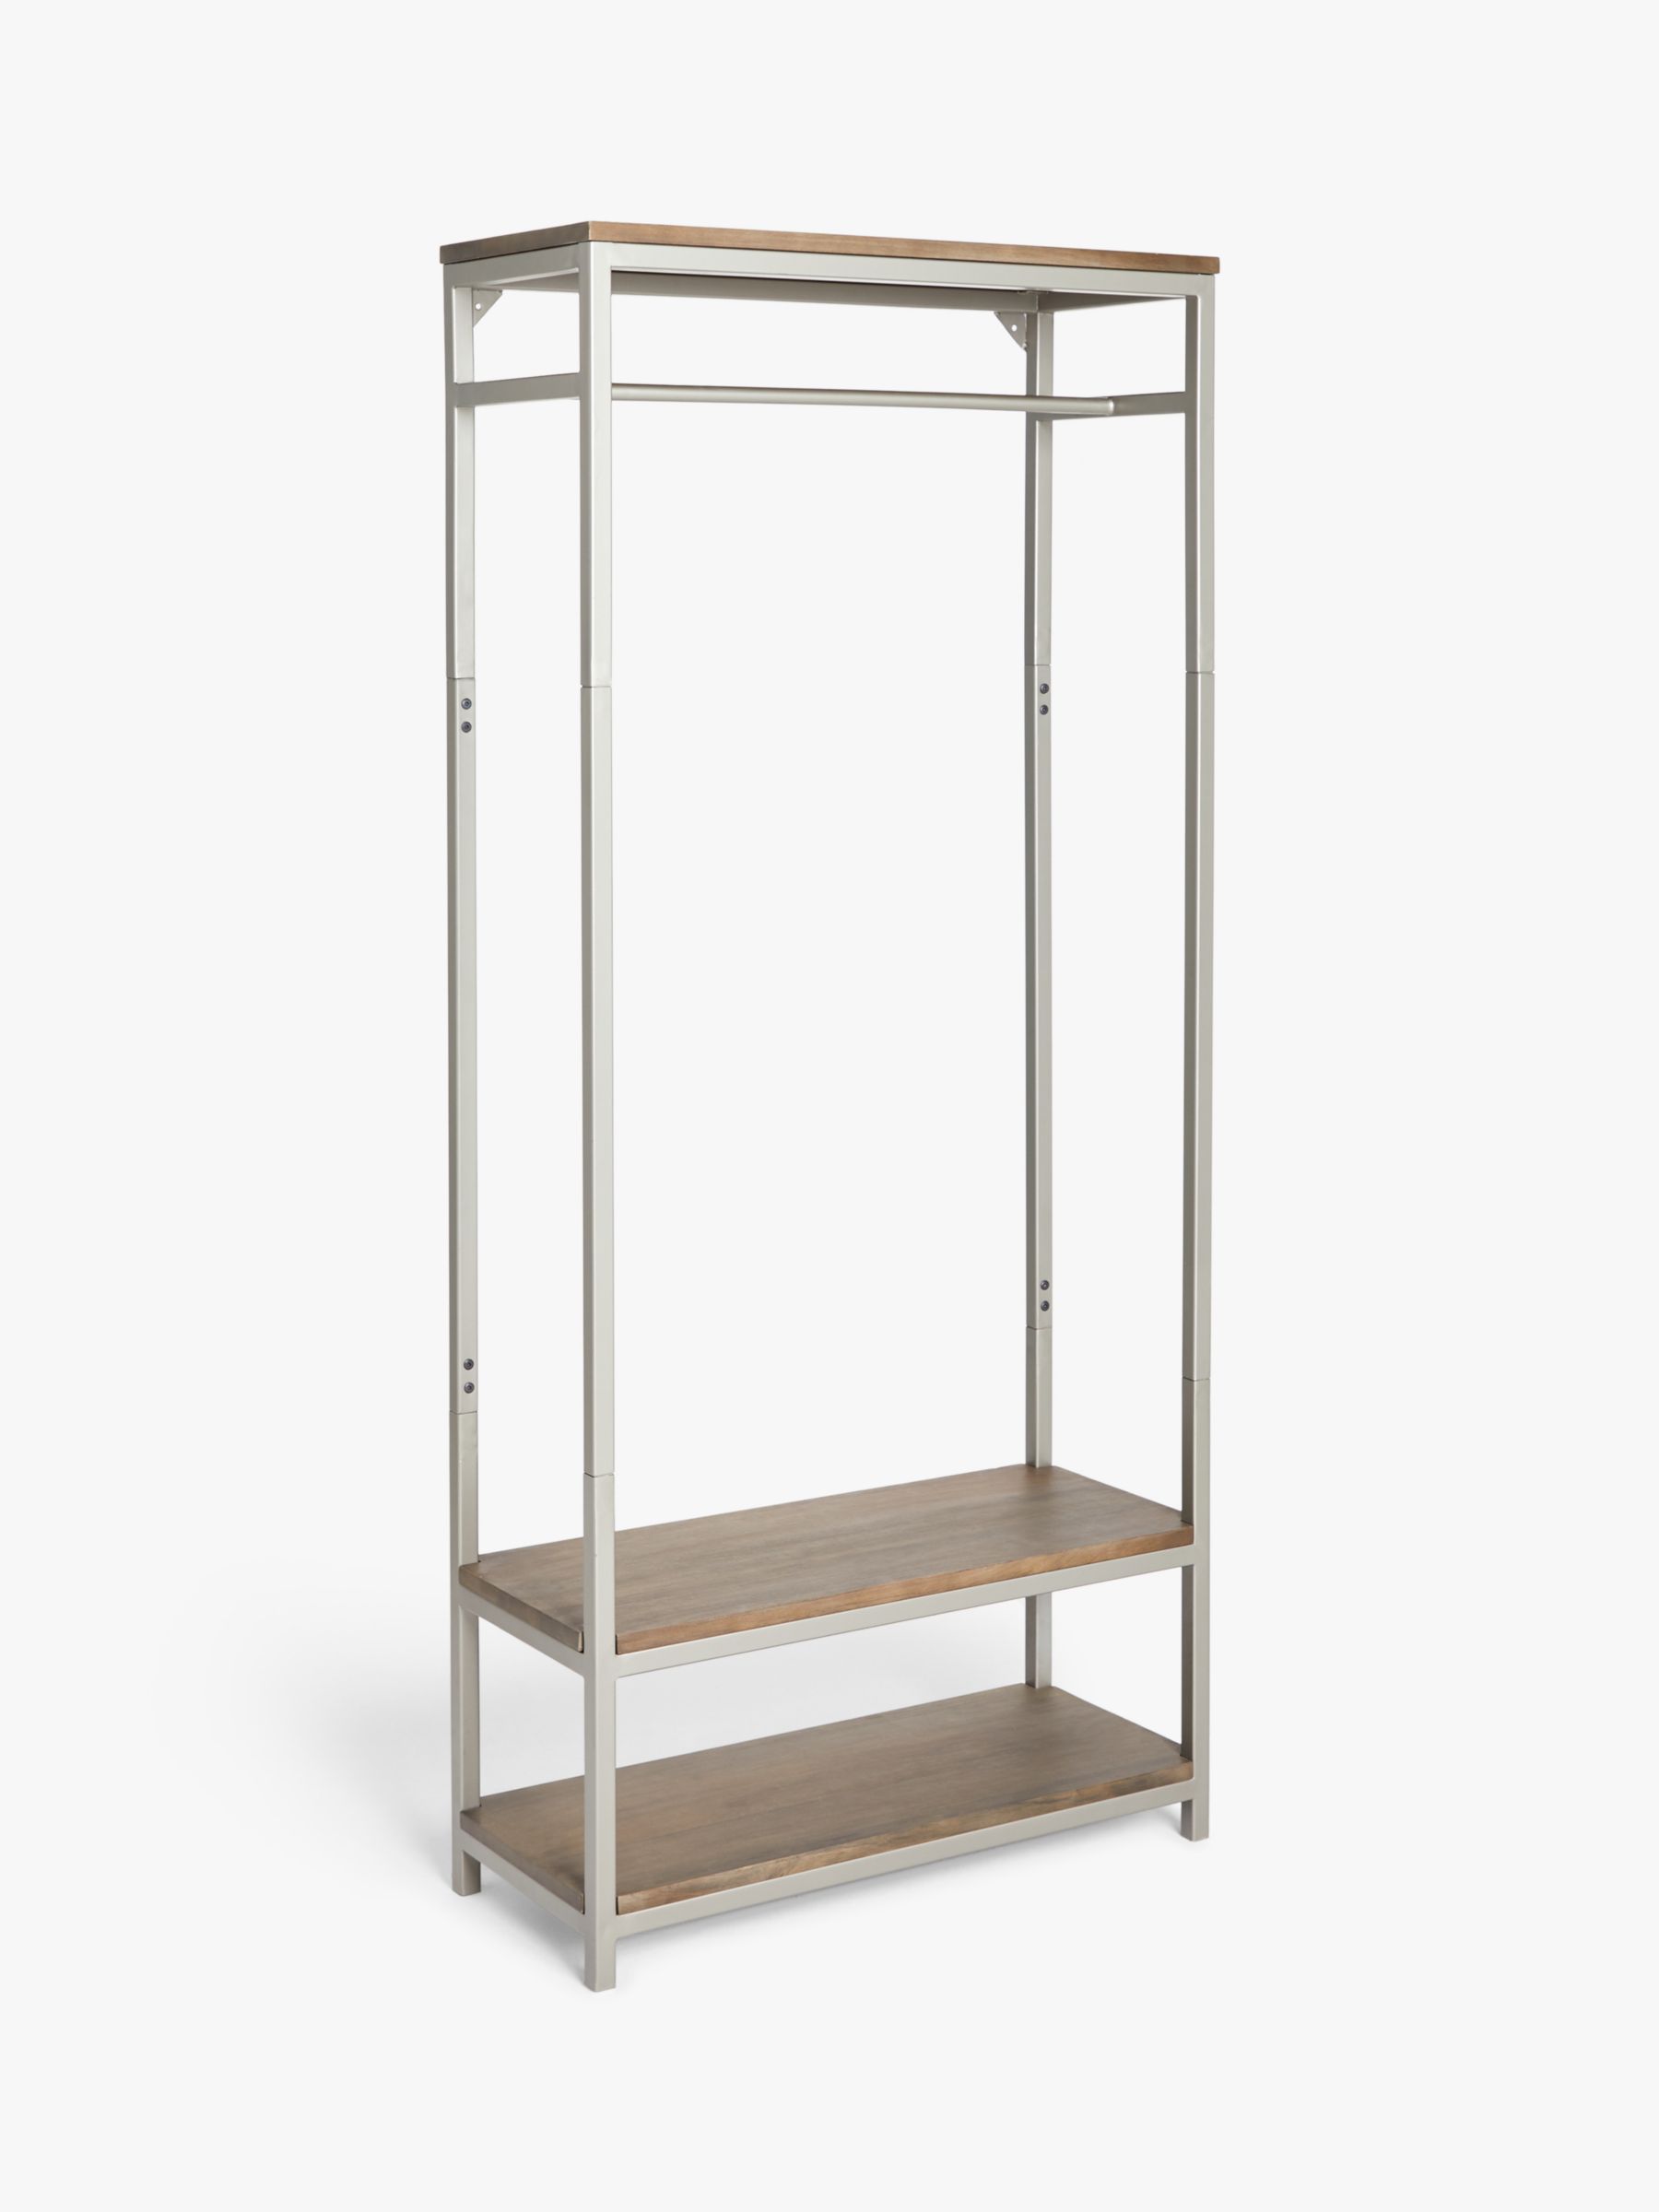 Photo of John lewis clothes rail with shelves antique grey